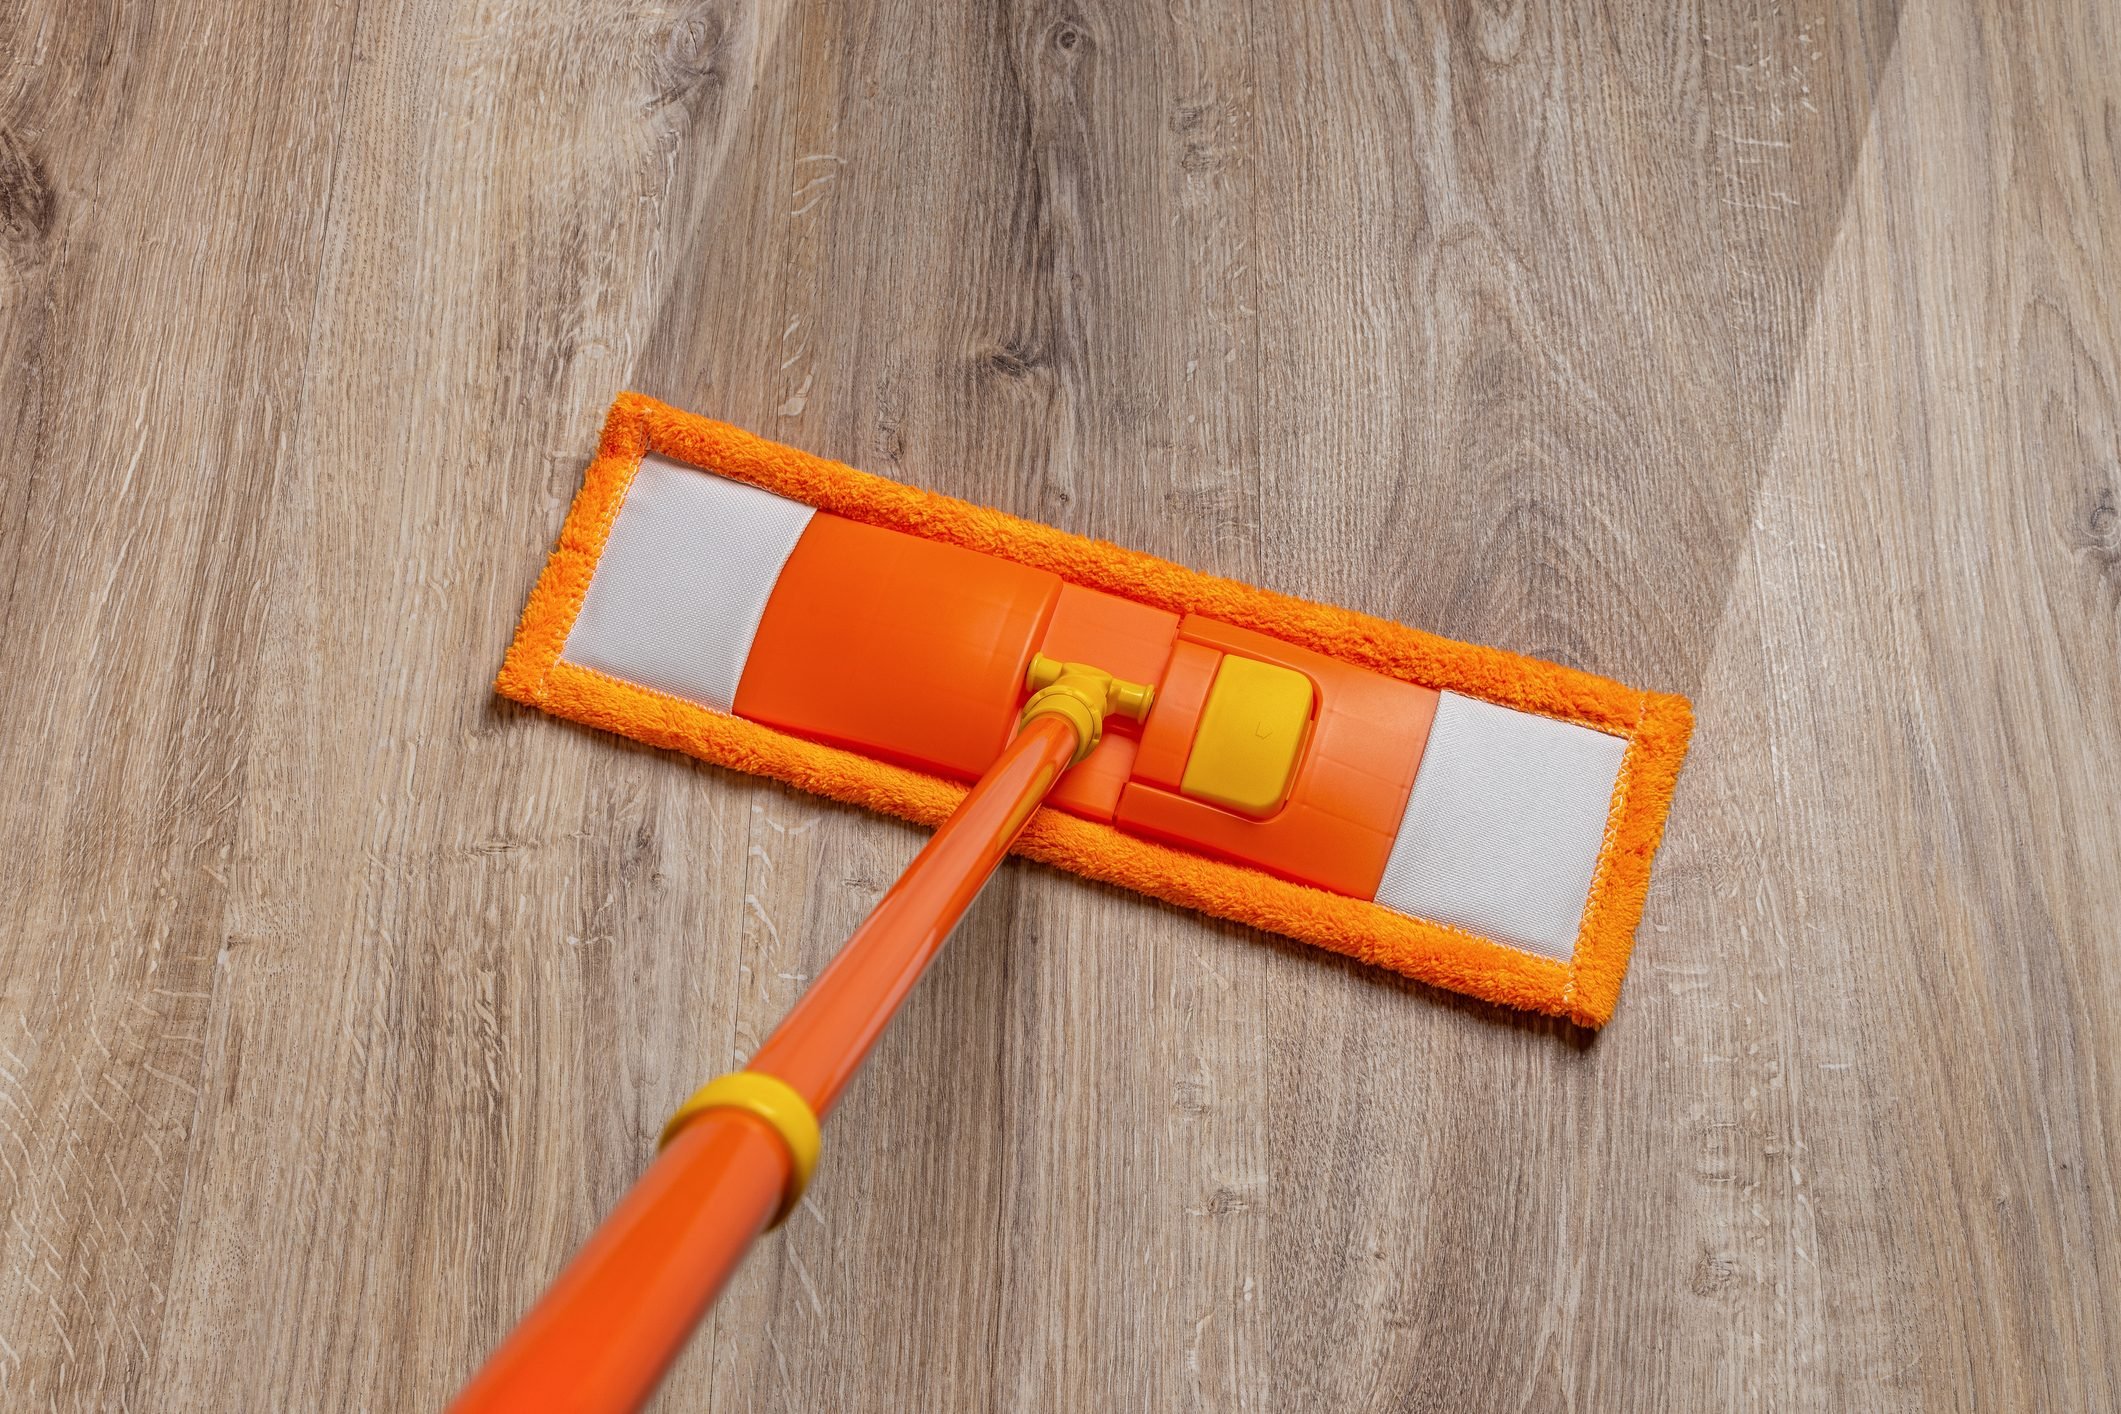 Orange mop washing dusty floor at home. Cleaning the wooden laminate floor with wet microfiber mop. Mopping the floor. Housekeeping, homework routine, cleaning concept.